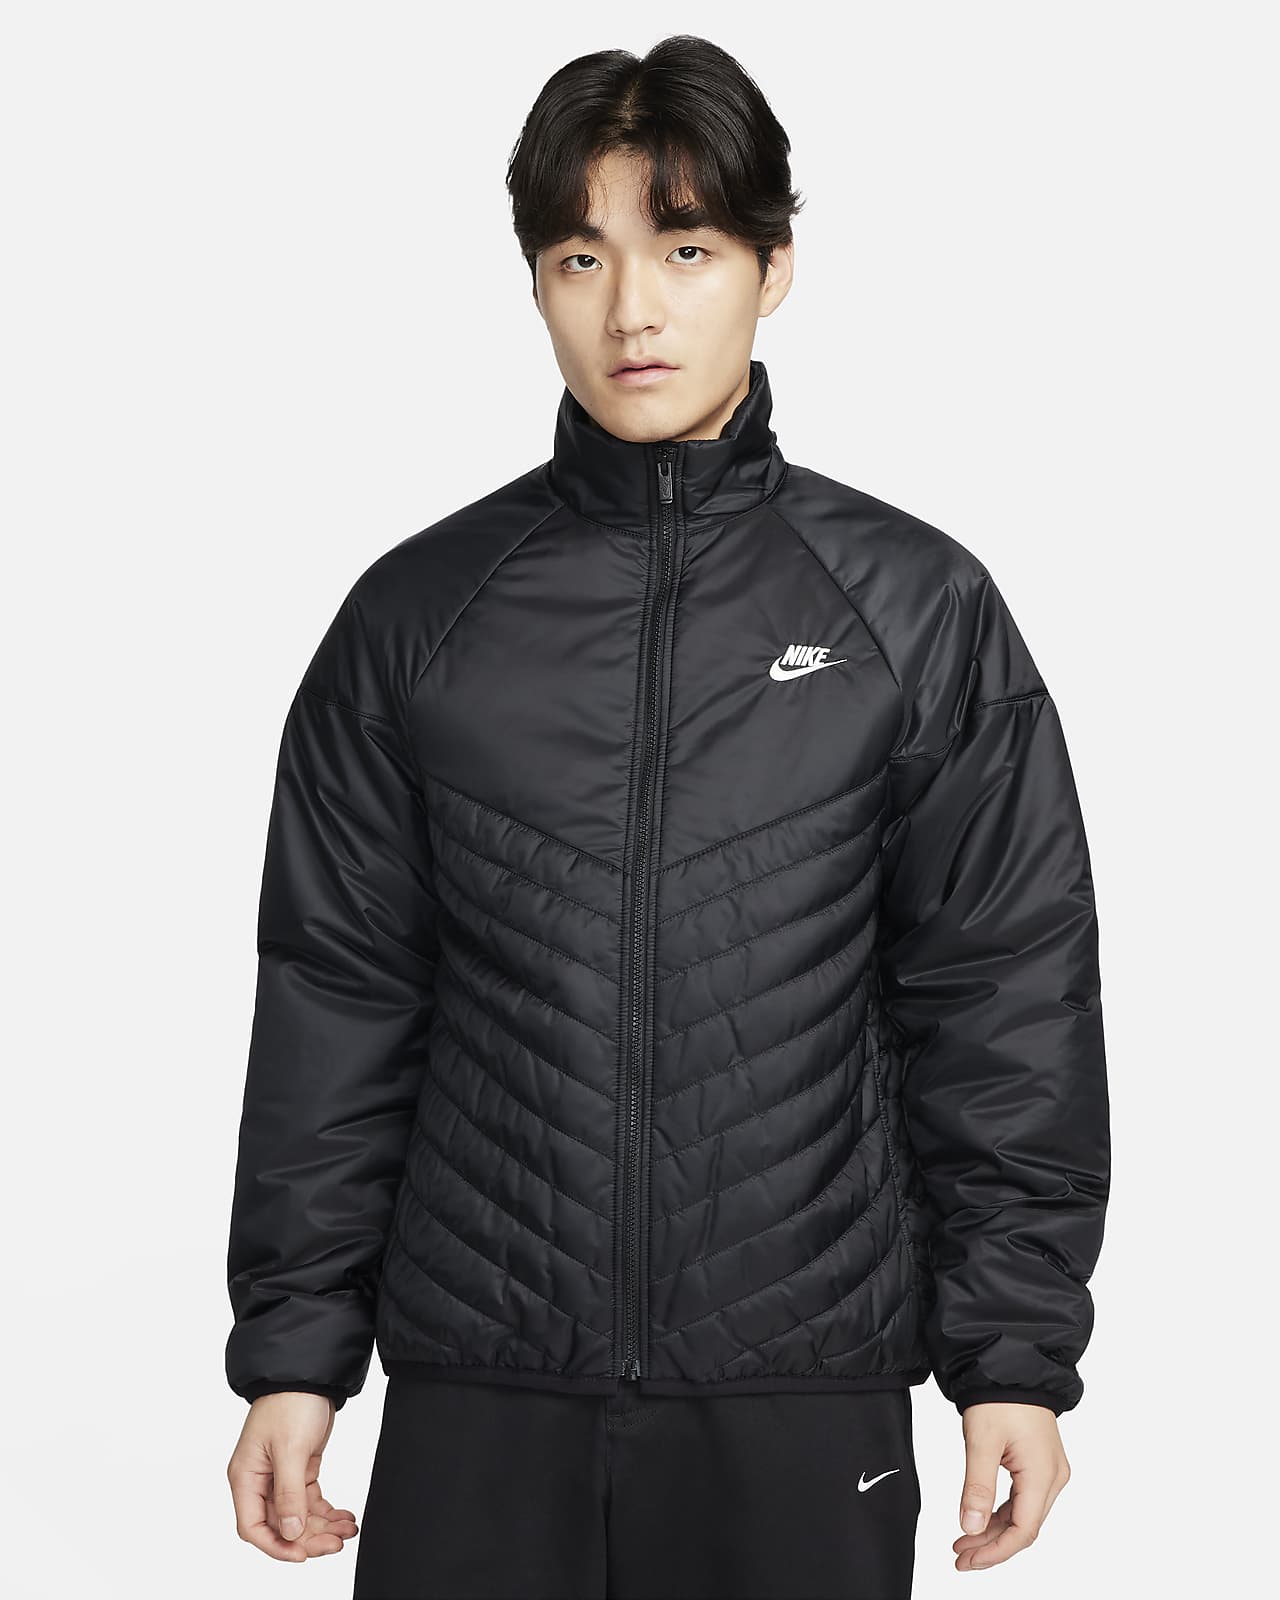 https://static.nike.com/a/images/t_PDP_1280_v1/f_auto,q_auto:eco/53b06a50-6f77-4e6f-a6b7-7c7330ae3836/sportswear-windrunner-midweight-puffer-jacket-WWnd5N.png